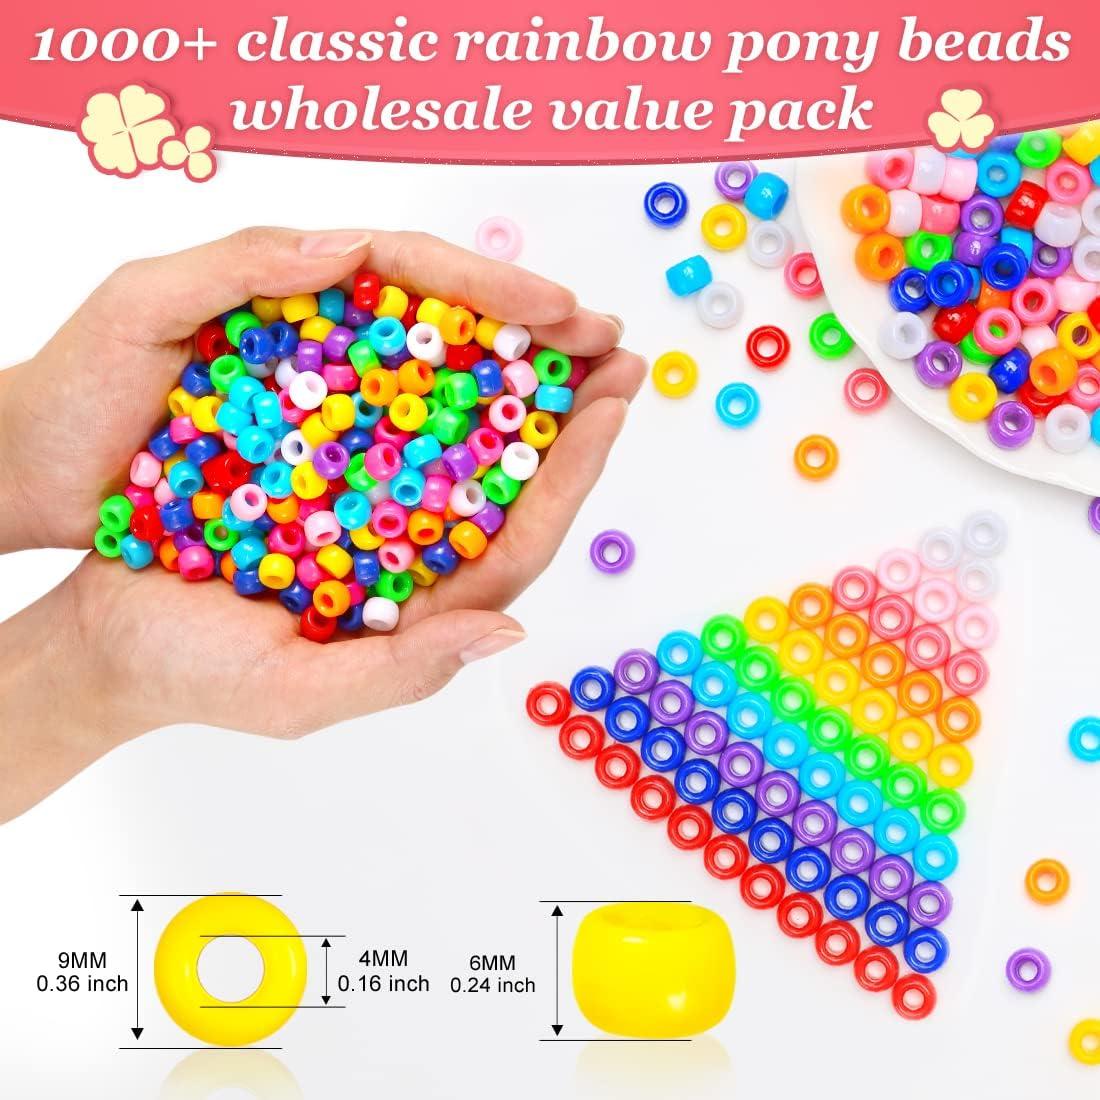 VOOMOLOVE 1000 pcs Pony Beads, Multi-colored Bracelet Beads, Beads for Hair  Braids, Beads for crafts, Plastic Beads, Hair Beads for Braids